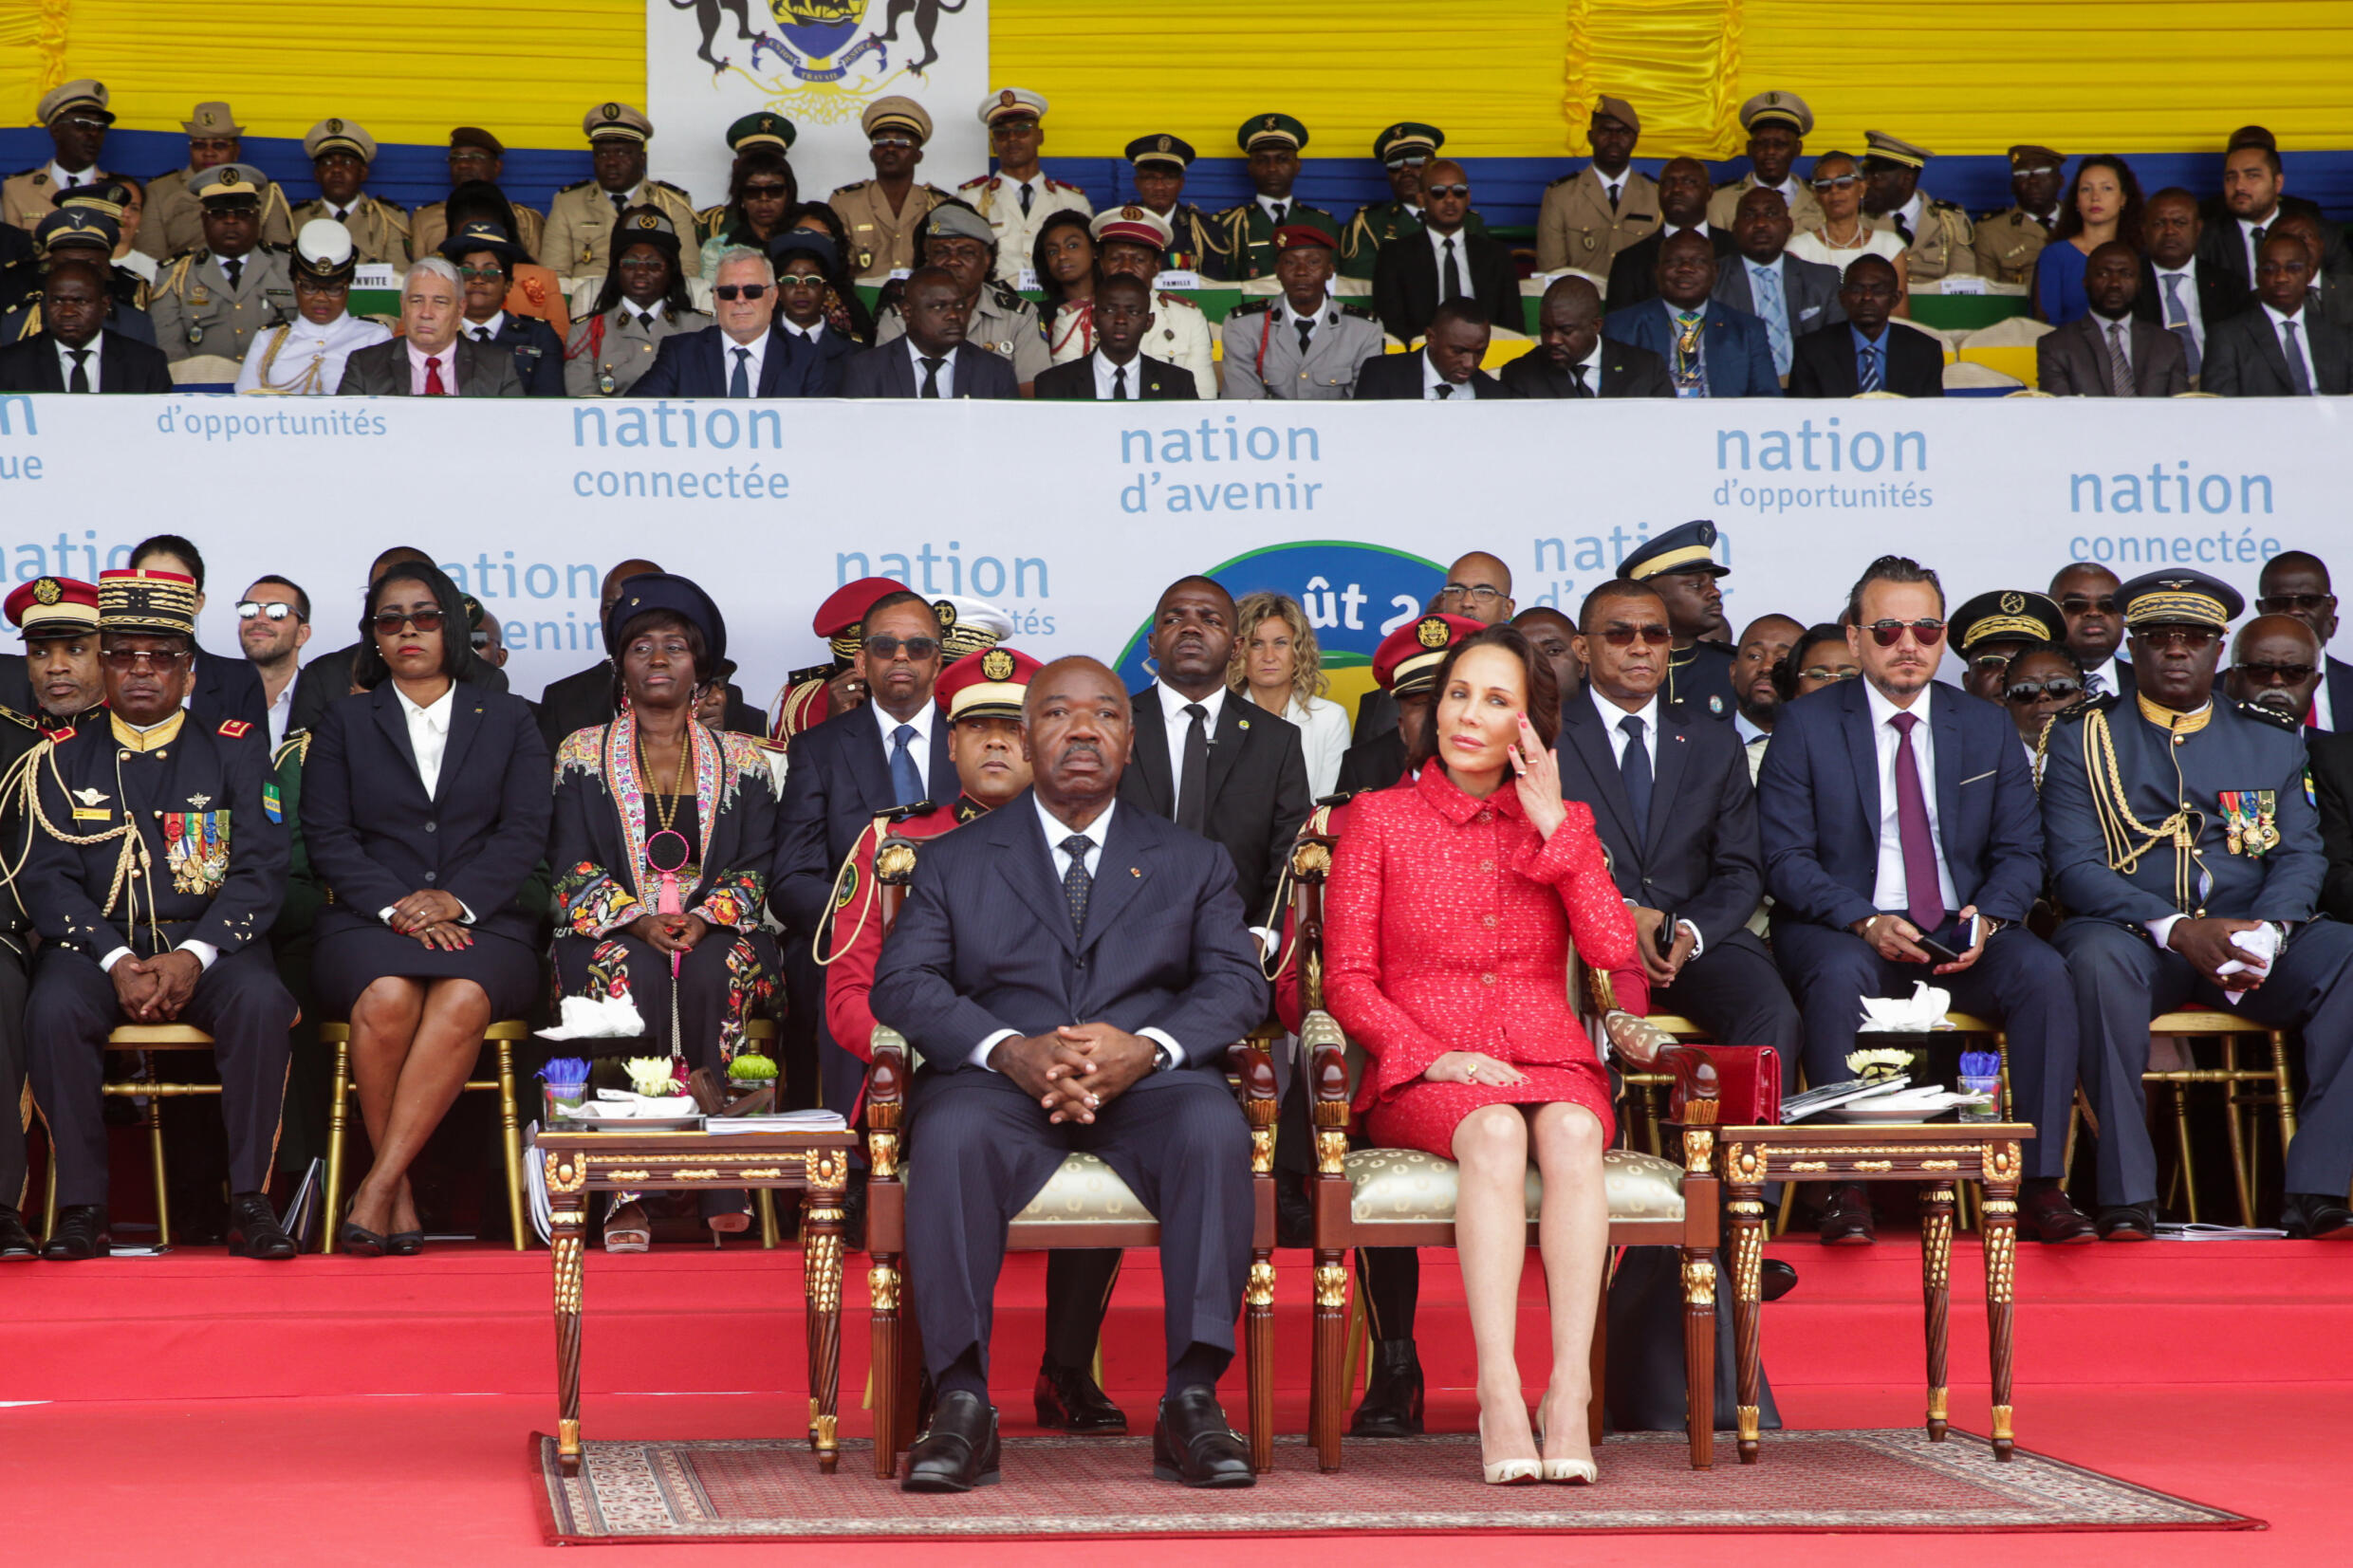 Gabonese President Ali Bongo and his wife Sylvia Bongo during a parade to commemorate the country's independence, in Libreville, August 17, 2019.